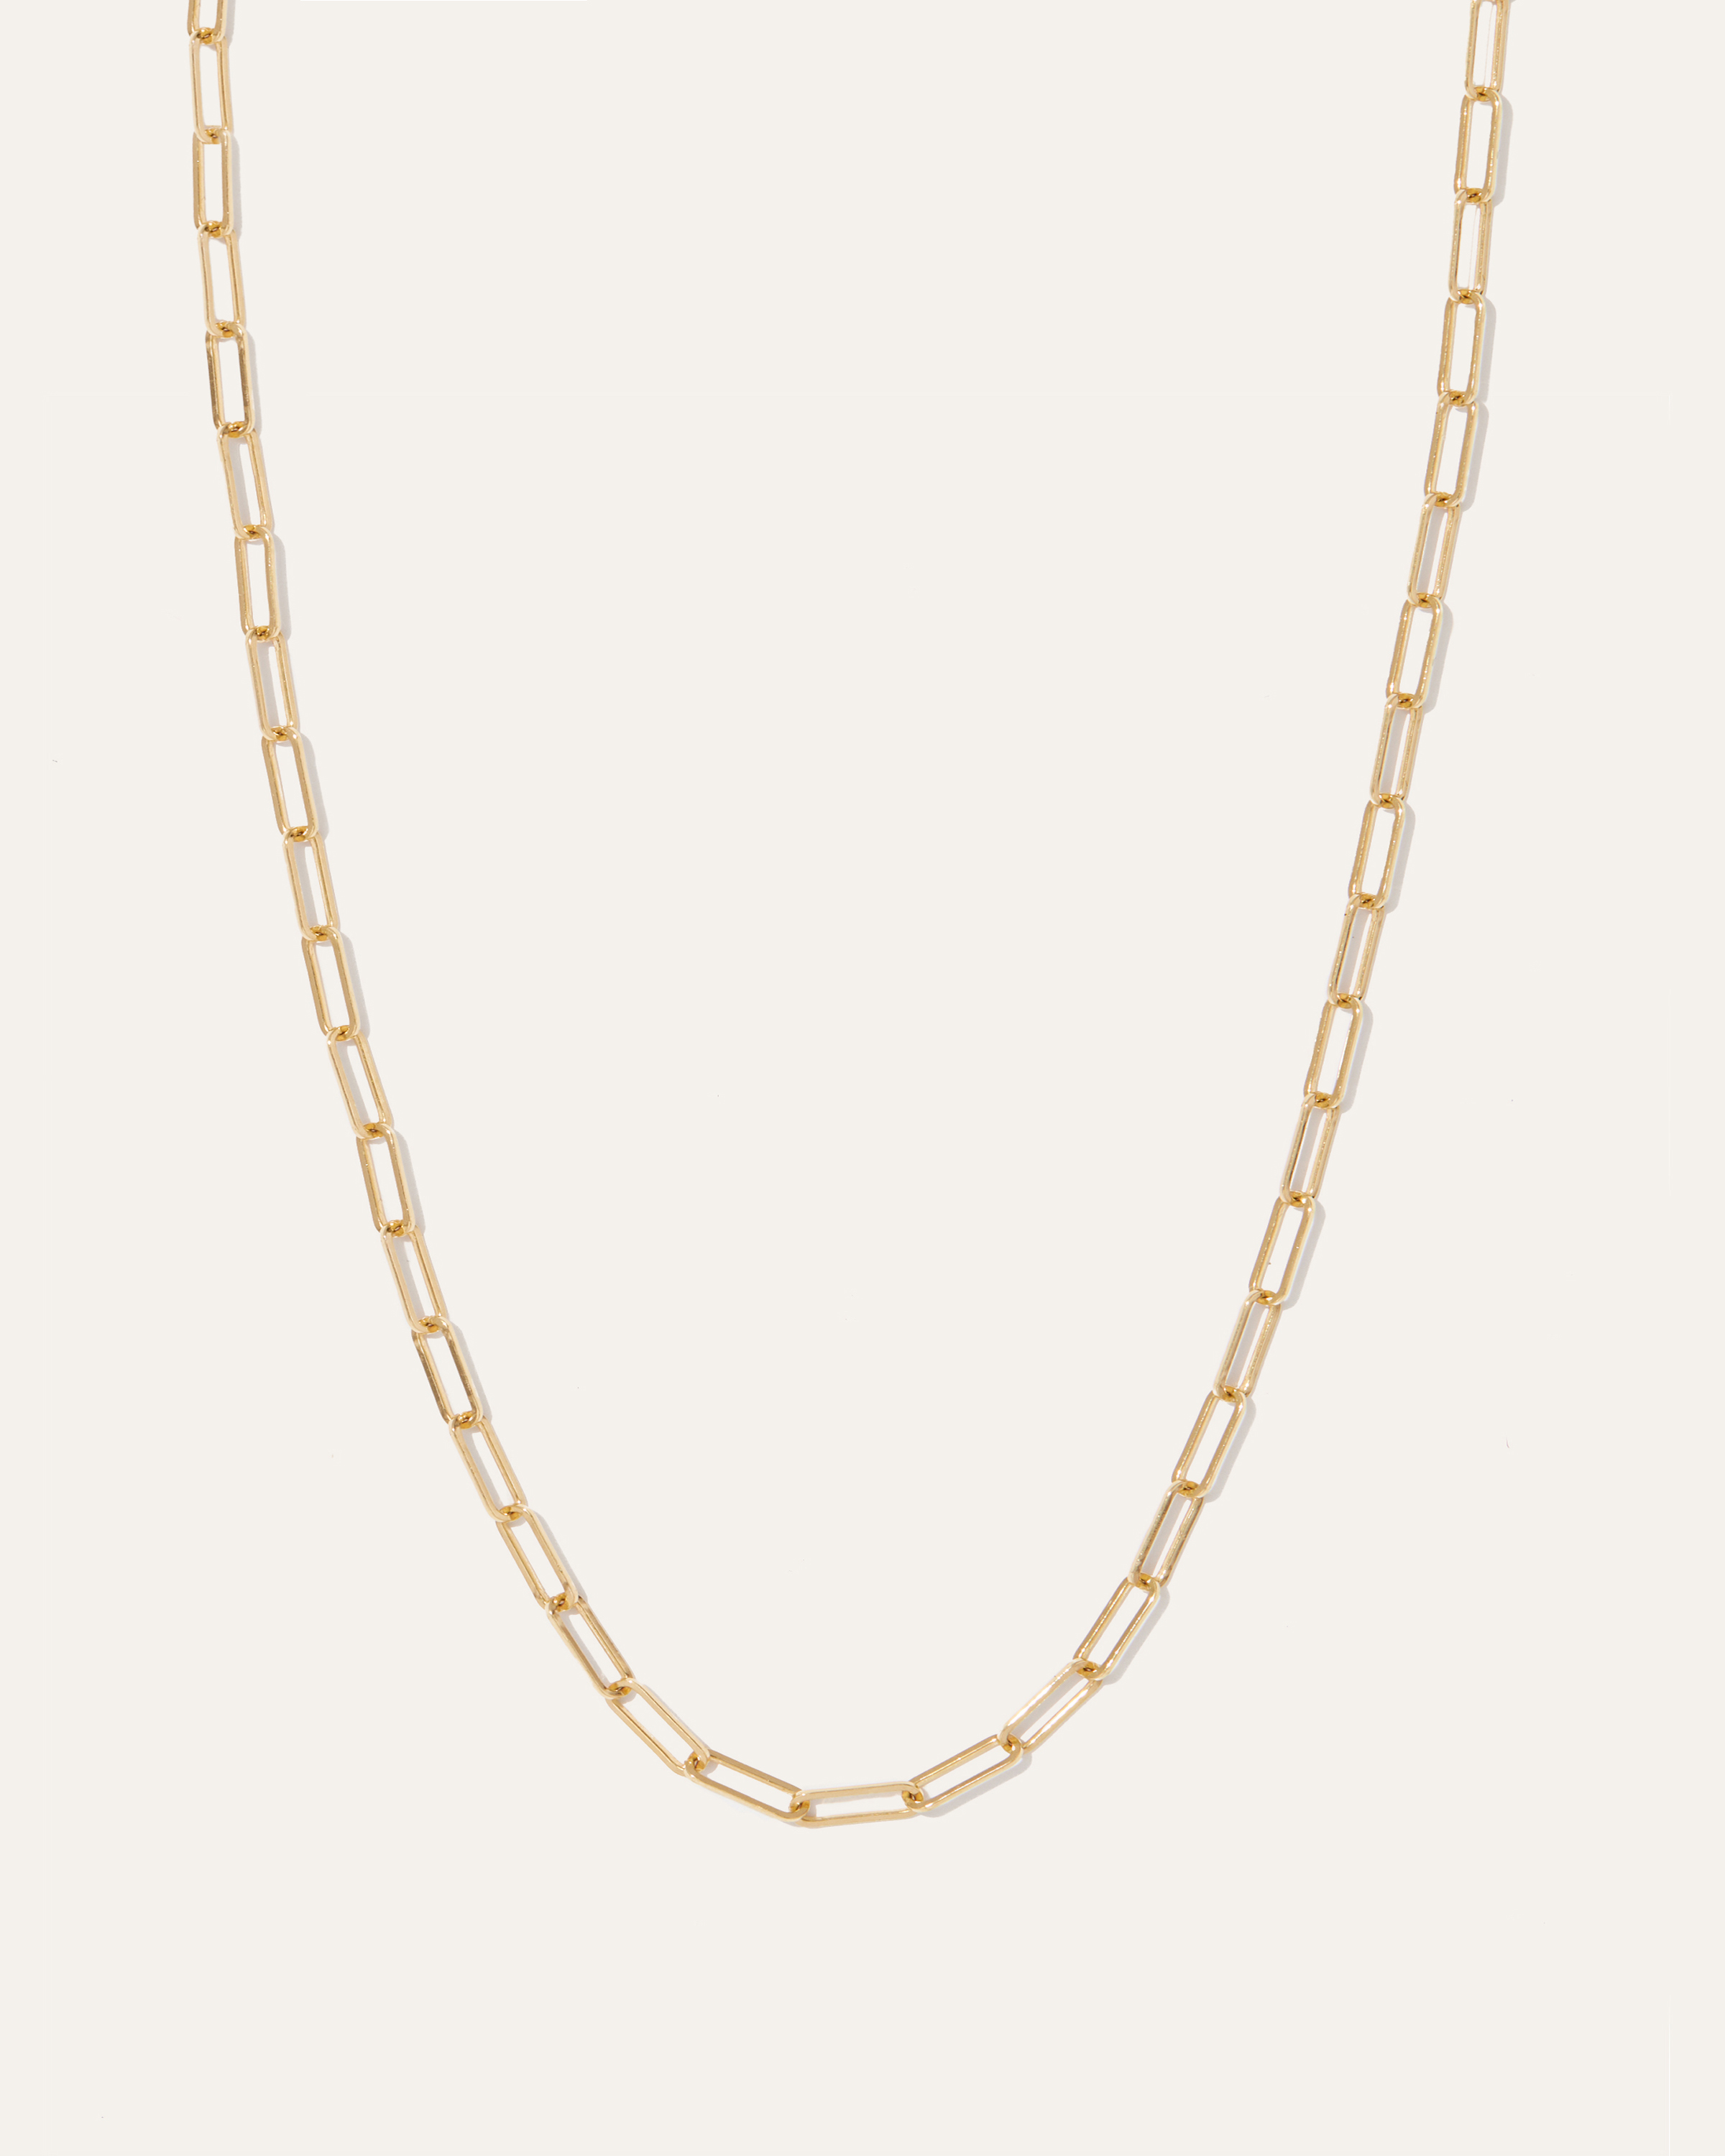 Quince Women's 14k Gold Long Chain Link Necklace